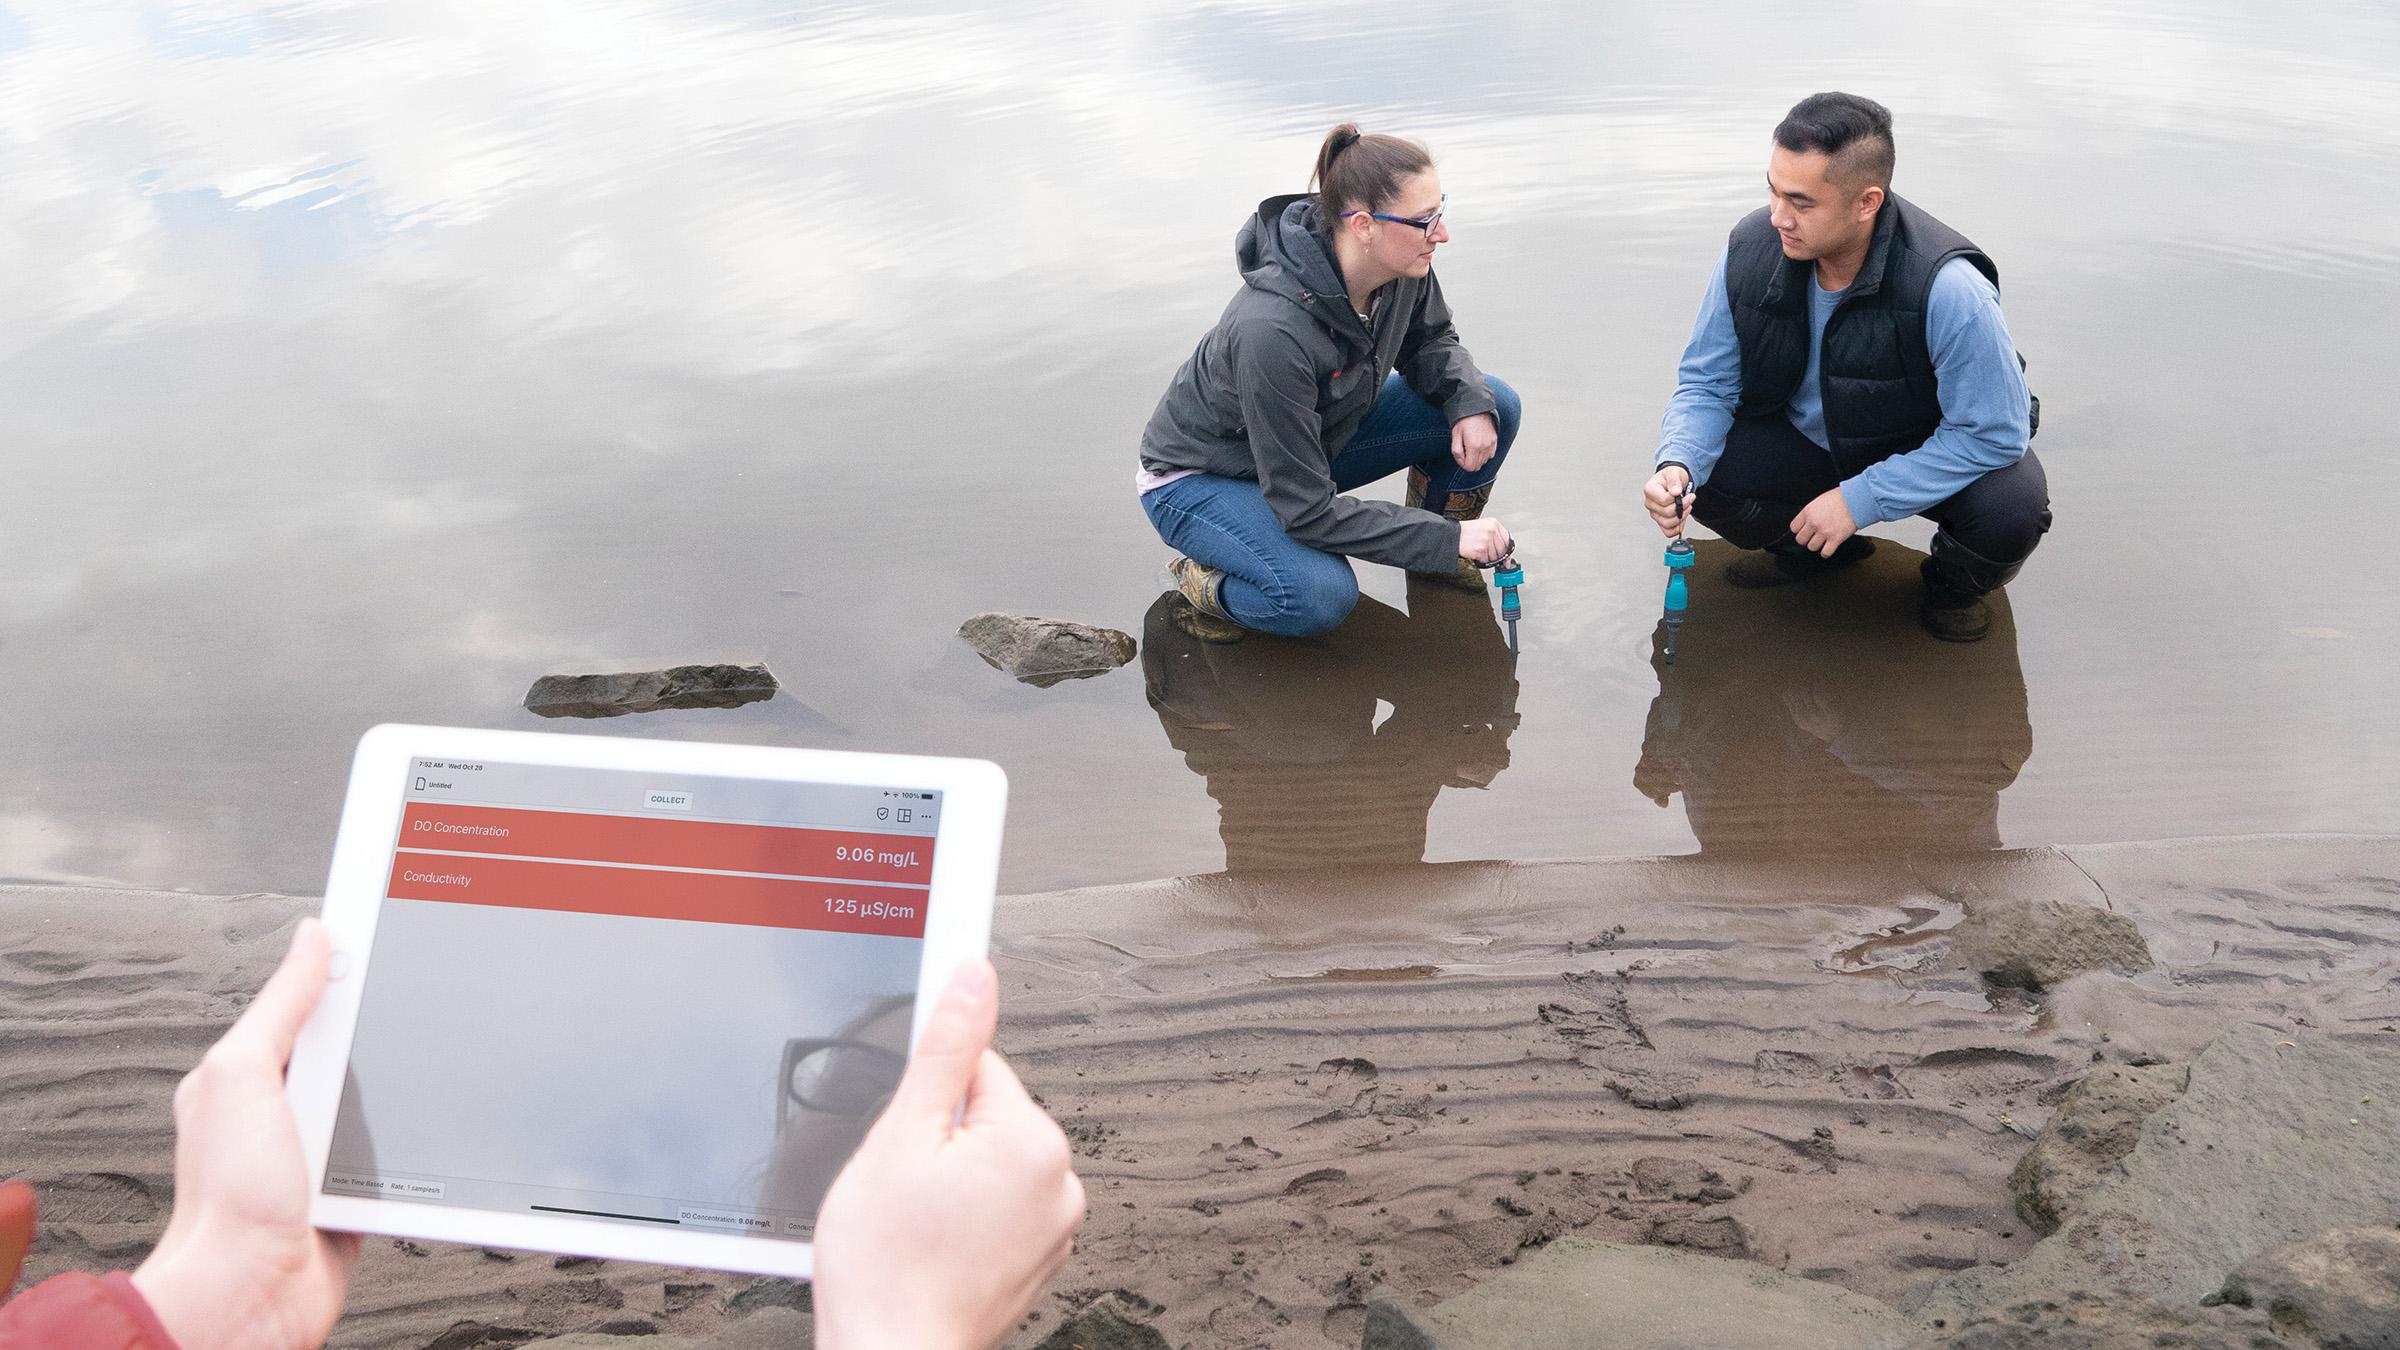 Students sampling water quality at a river's edge